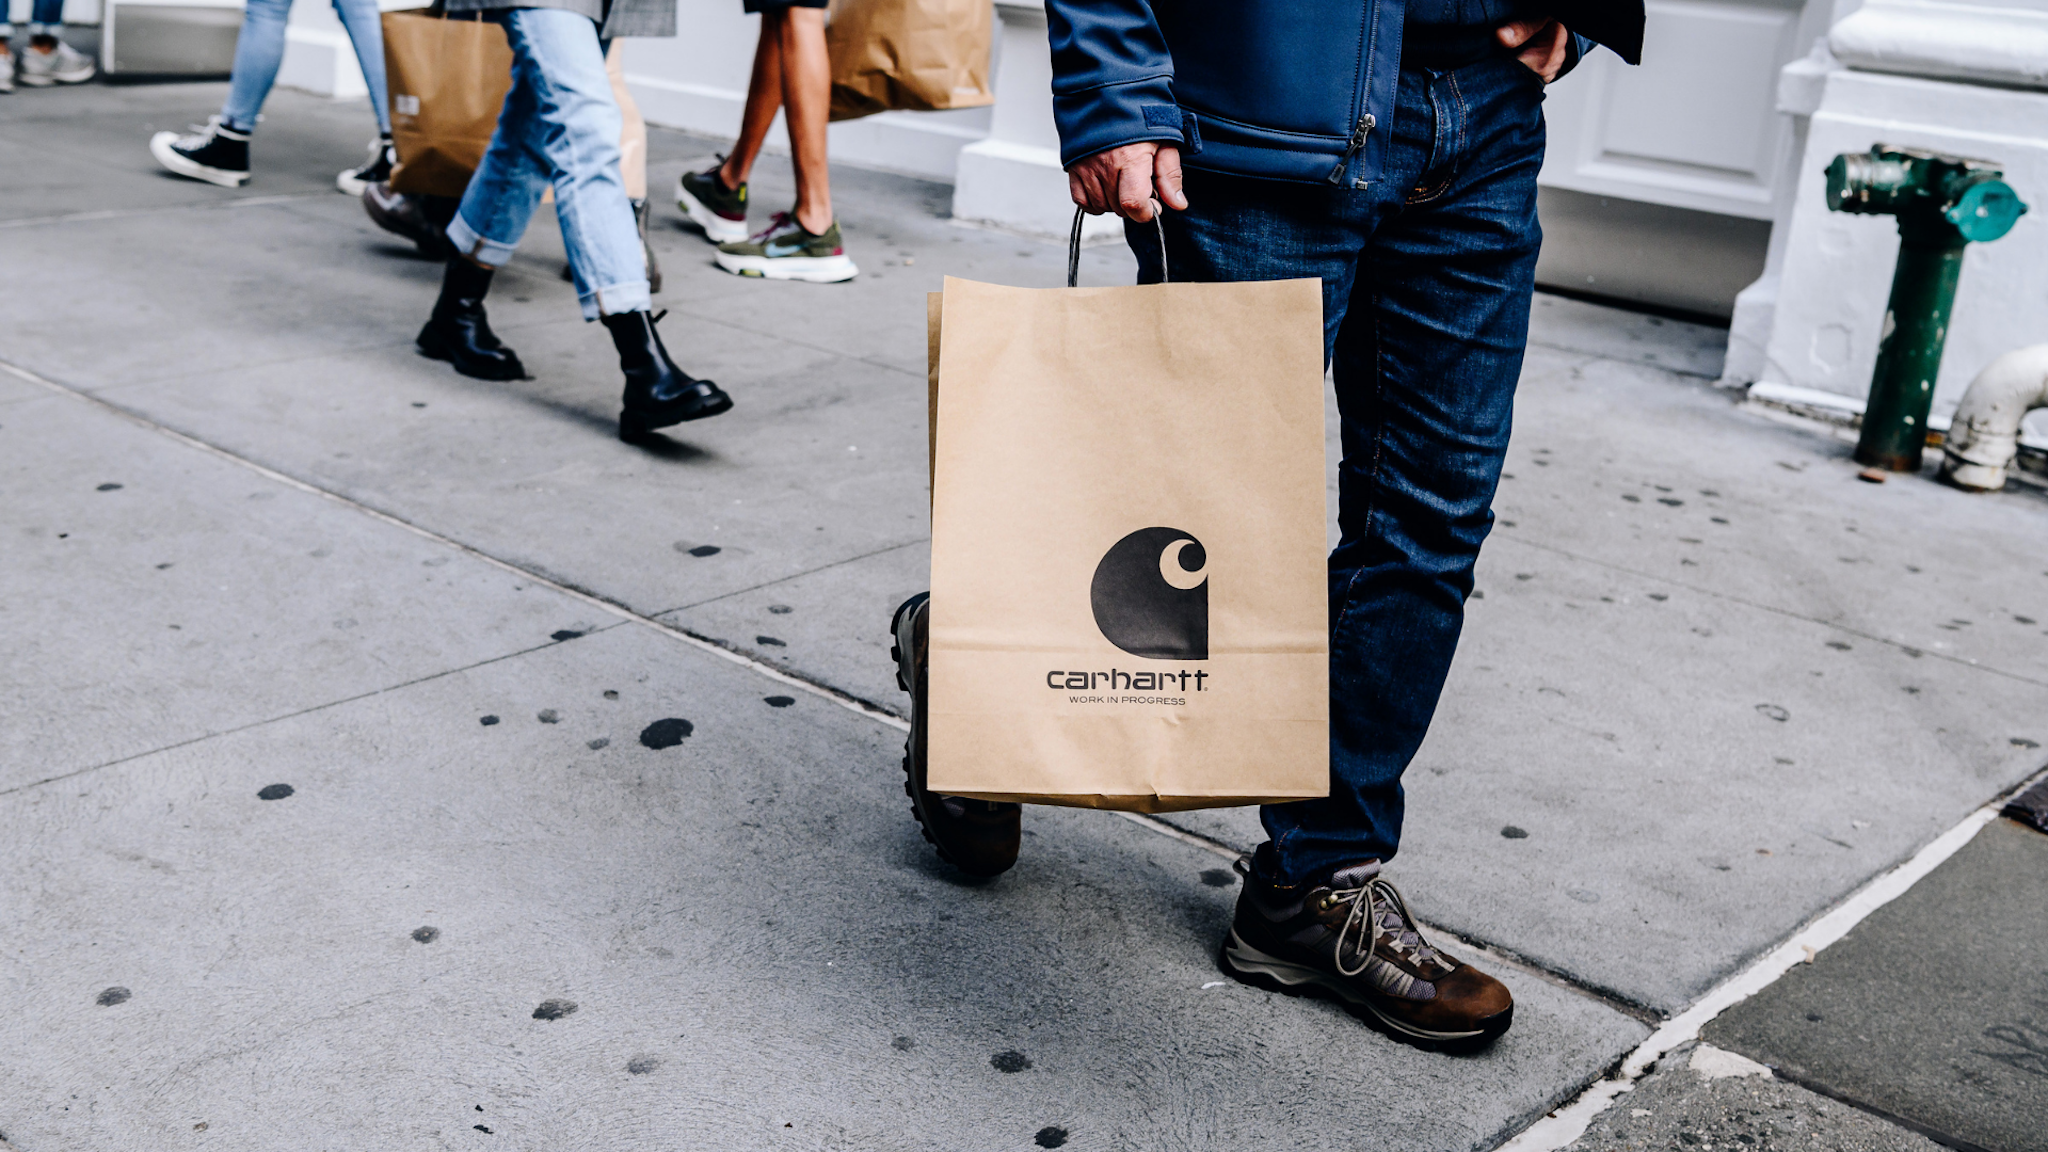 A pedestrian carries a Carhartt shopping bag in the SoHo neighborhood of New York, U.S., on Sunday, Oct. 24, 2021. Consumers are facing dire warnings to get their holiday shopping done early this year, especially if theyre planning to do it online. Bottlenecks in the global supply chain are posing a new challenge to the e-commerce industry, and out-of-stock items represent a growing concern.